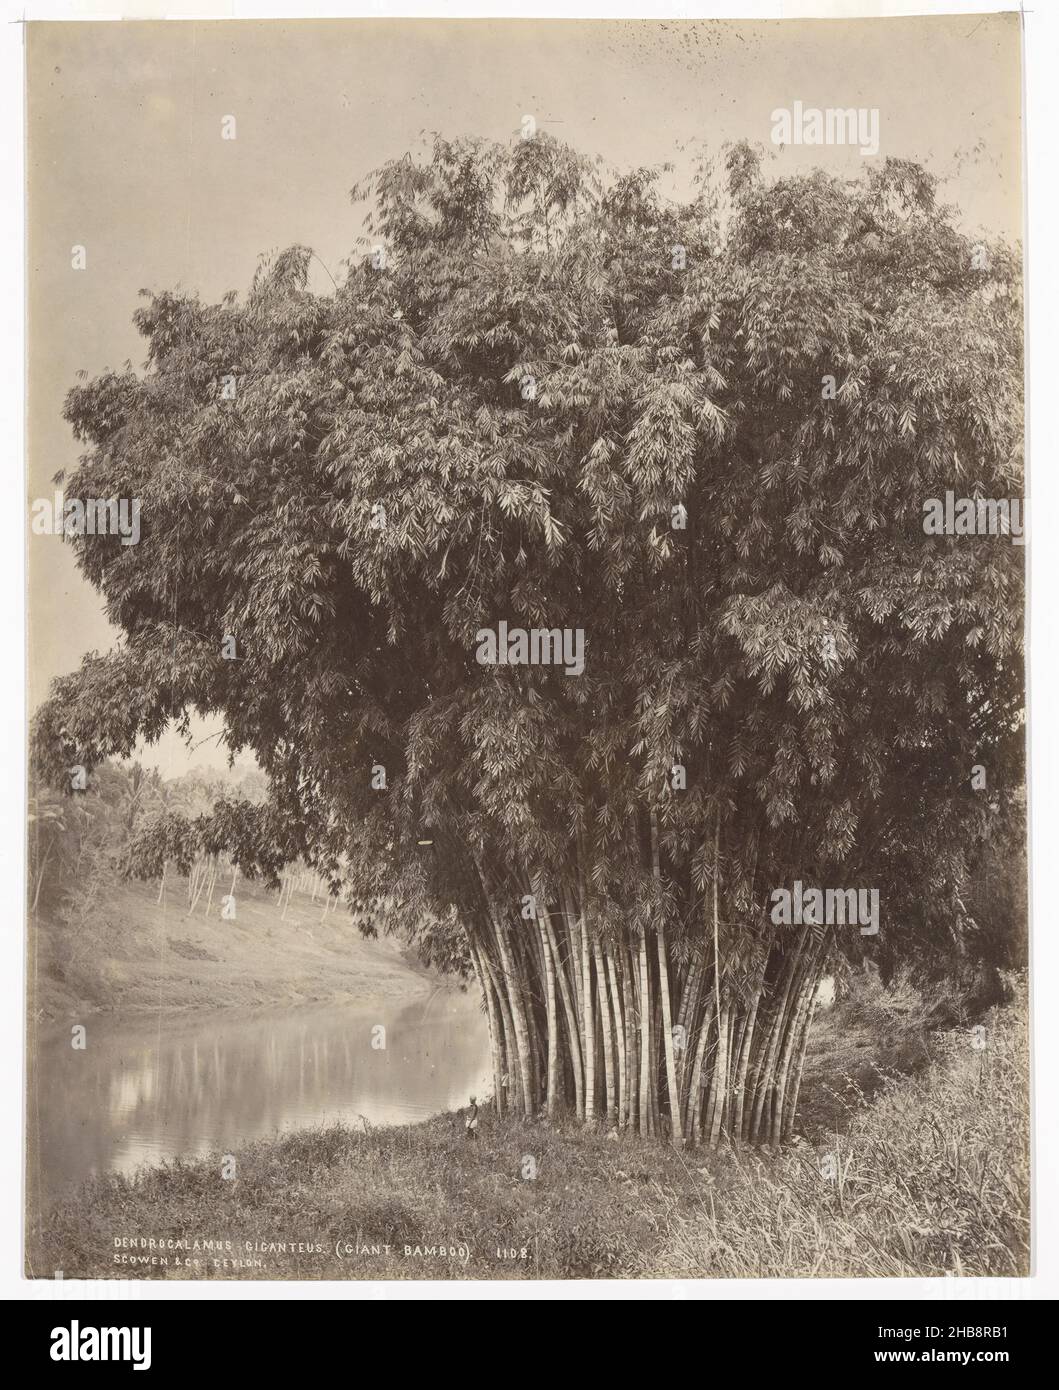 Giant bamboo along the waterfront, Dendrocalamus Giganteus. (Giant Bamboo). (title on object), Charles T. Scowen & Co. (mentioned on object), Sri Lanka, 1876 - 1893, paper, albumen print, height 271 mm × width 214 mm Stock Photo